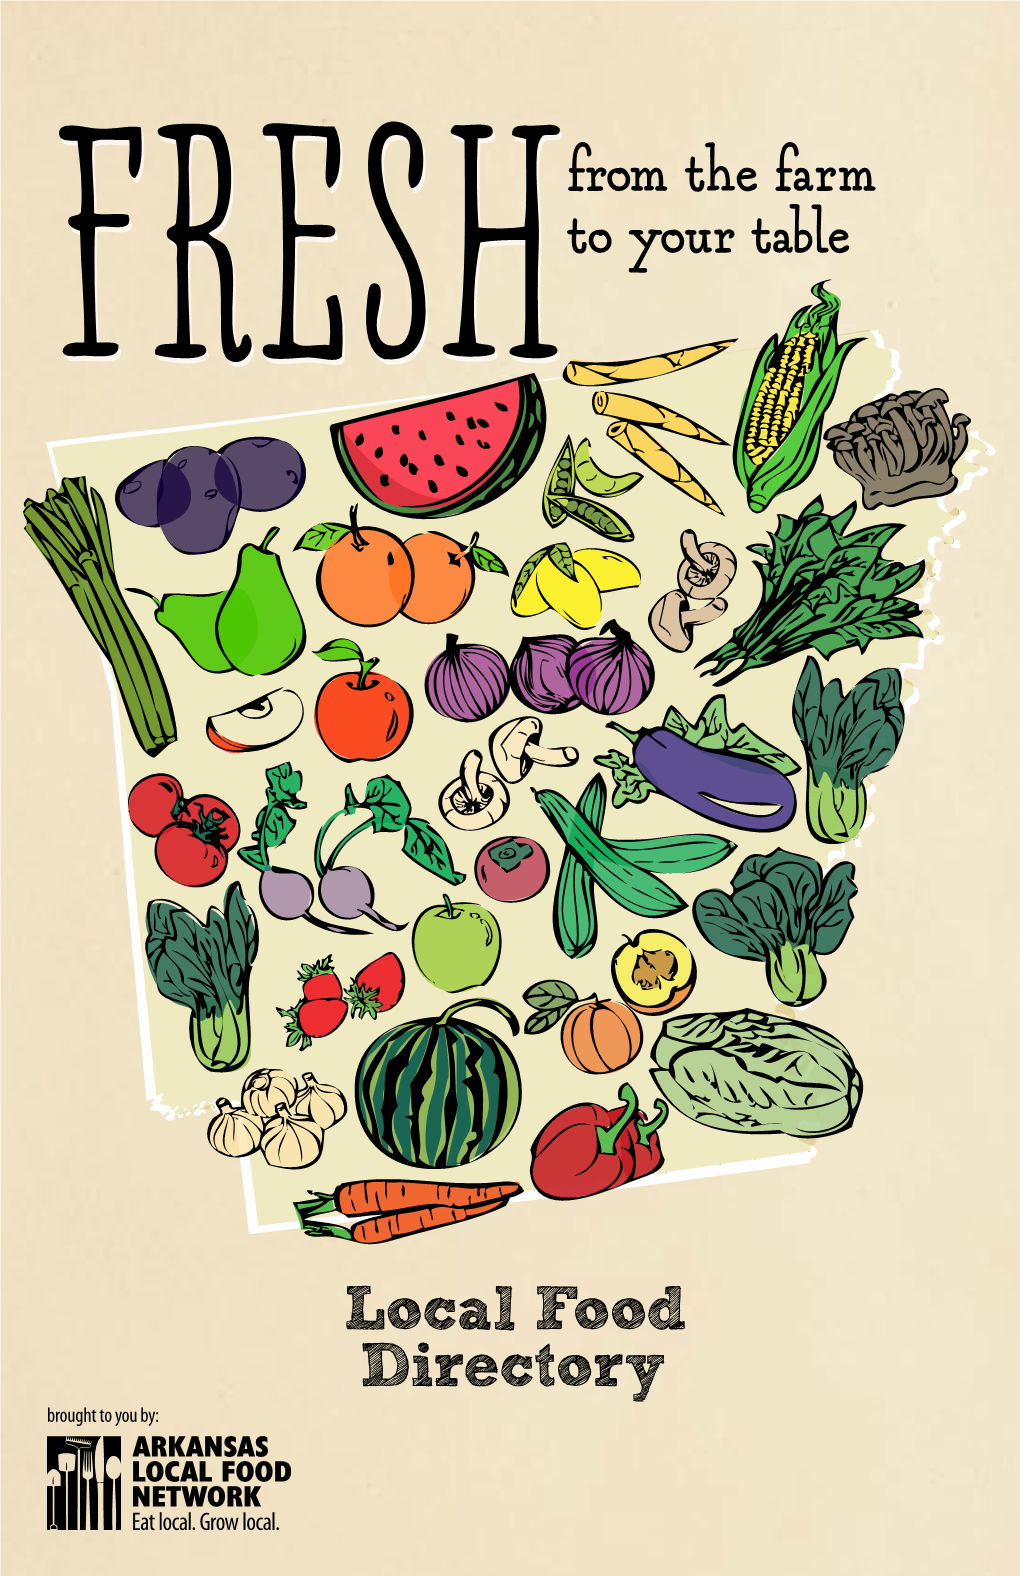 Local Food Directory from the Farm to Your Table